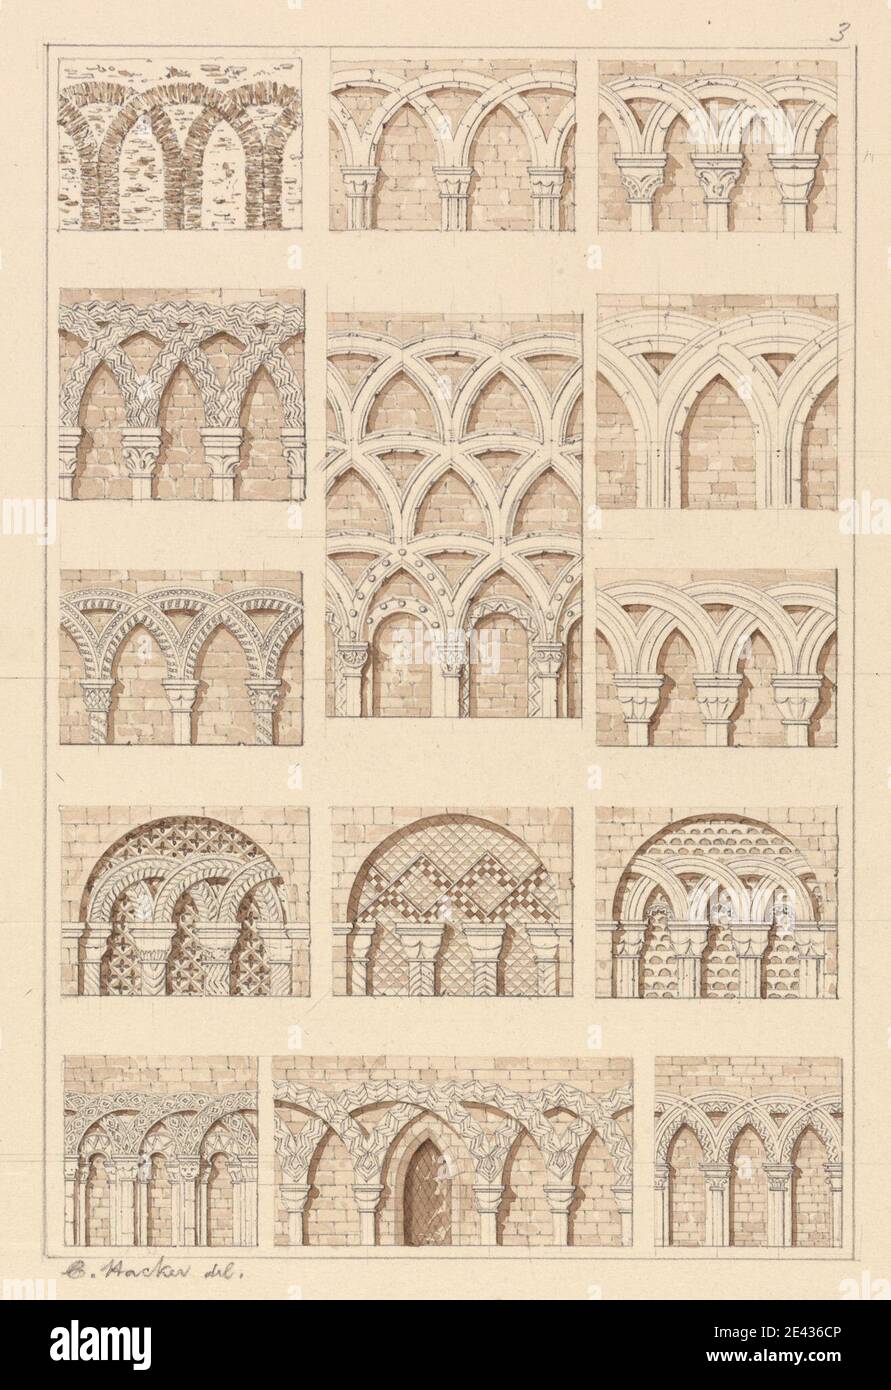 C. Hacker, Arcades: of Interlaced Mouldings, 1830. Pen and brown ink, graphite and brown wash on medium, slightly textured, cream wove paper.   arcades , architectural subject Stock Photo